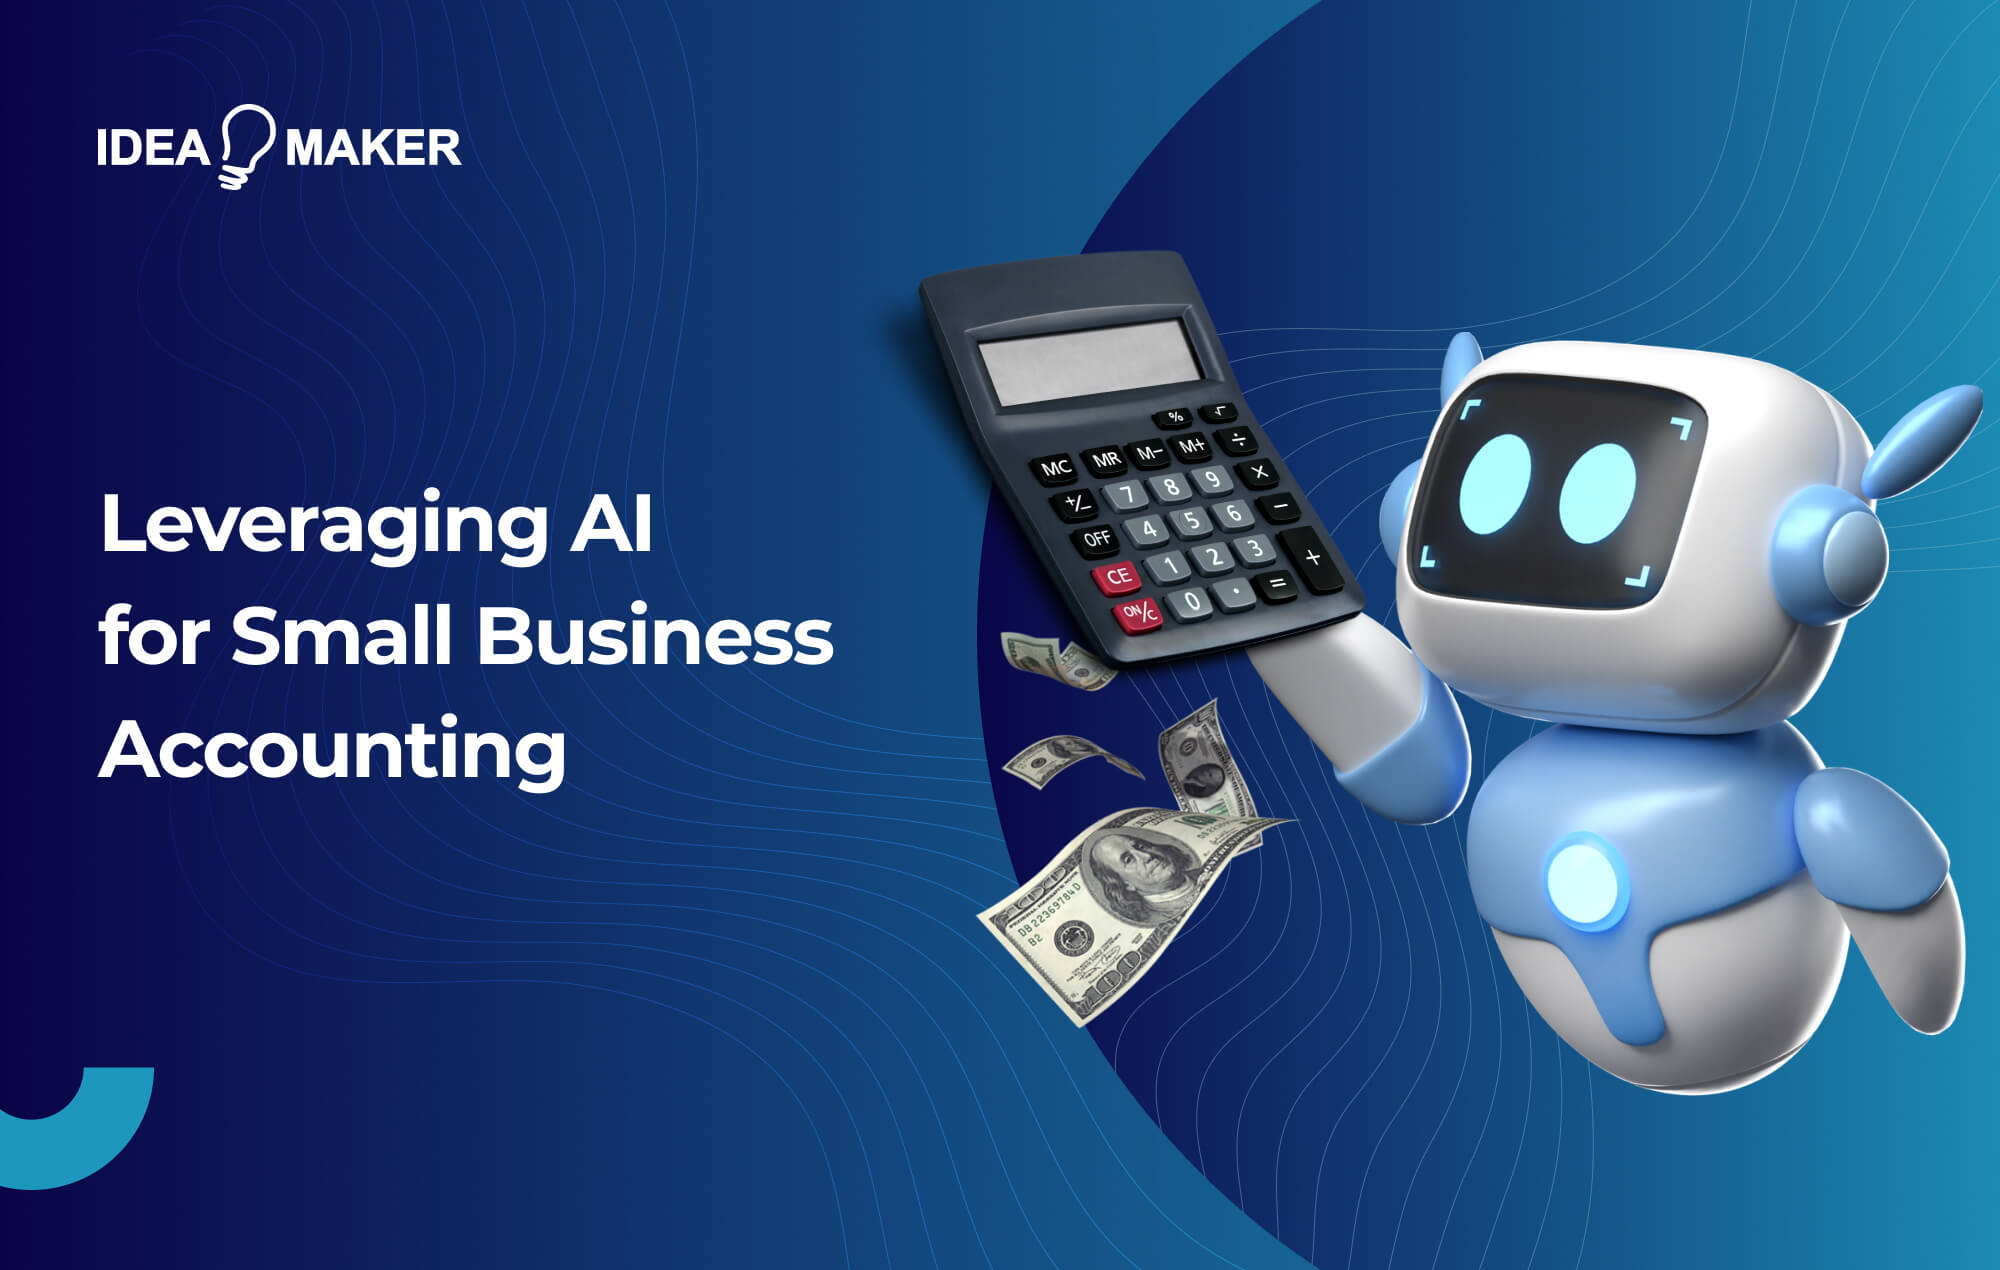 Leveraging AI for Small Business Accounting